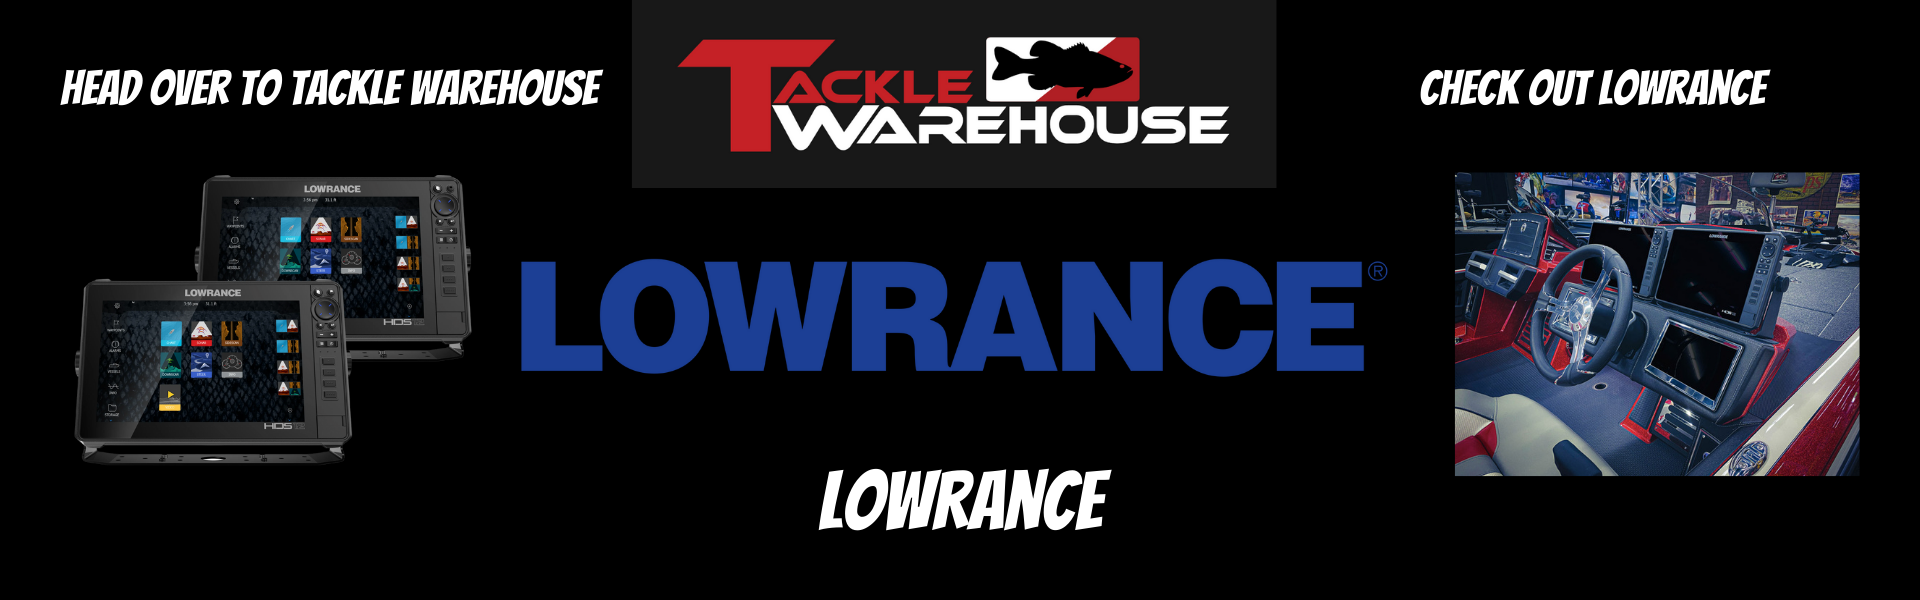 Check Out Lowrance Electronics At Tackle Warehouse Now